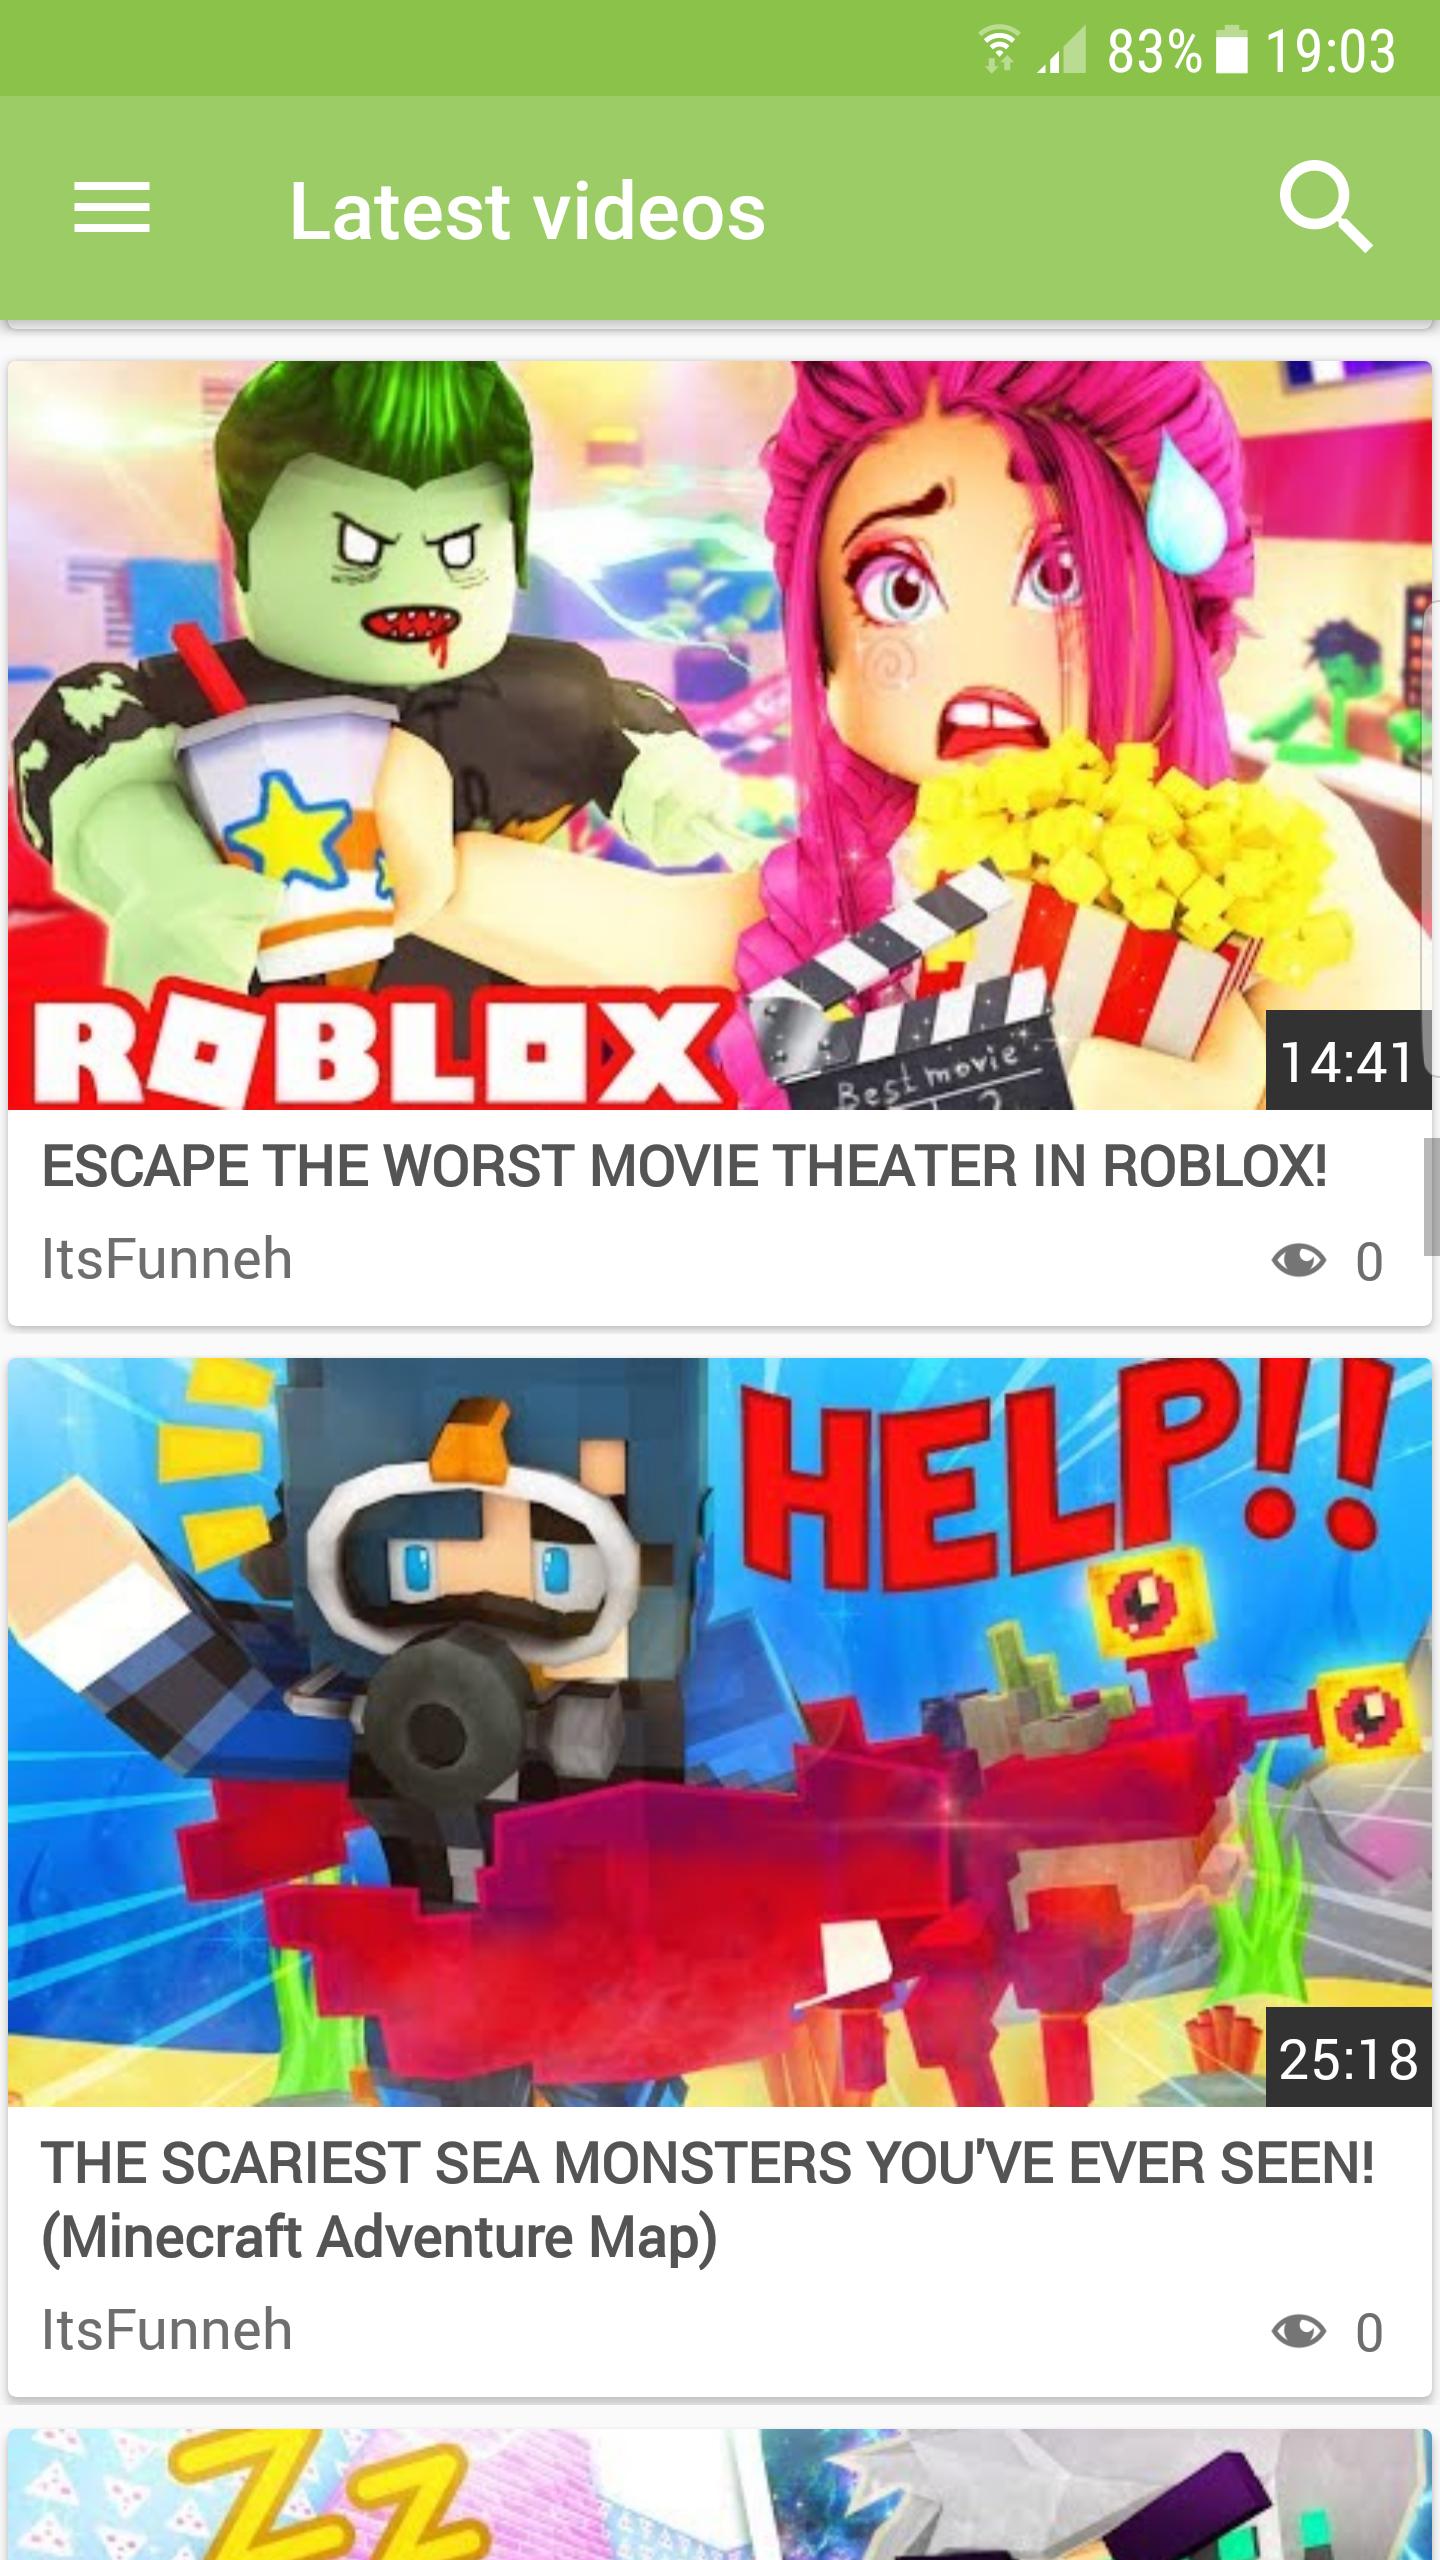 Itsfunneh Roblox Video For Android Apk Download - itsfunneh roblox logiciels montage